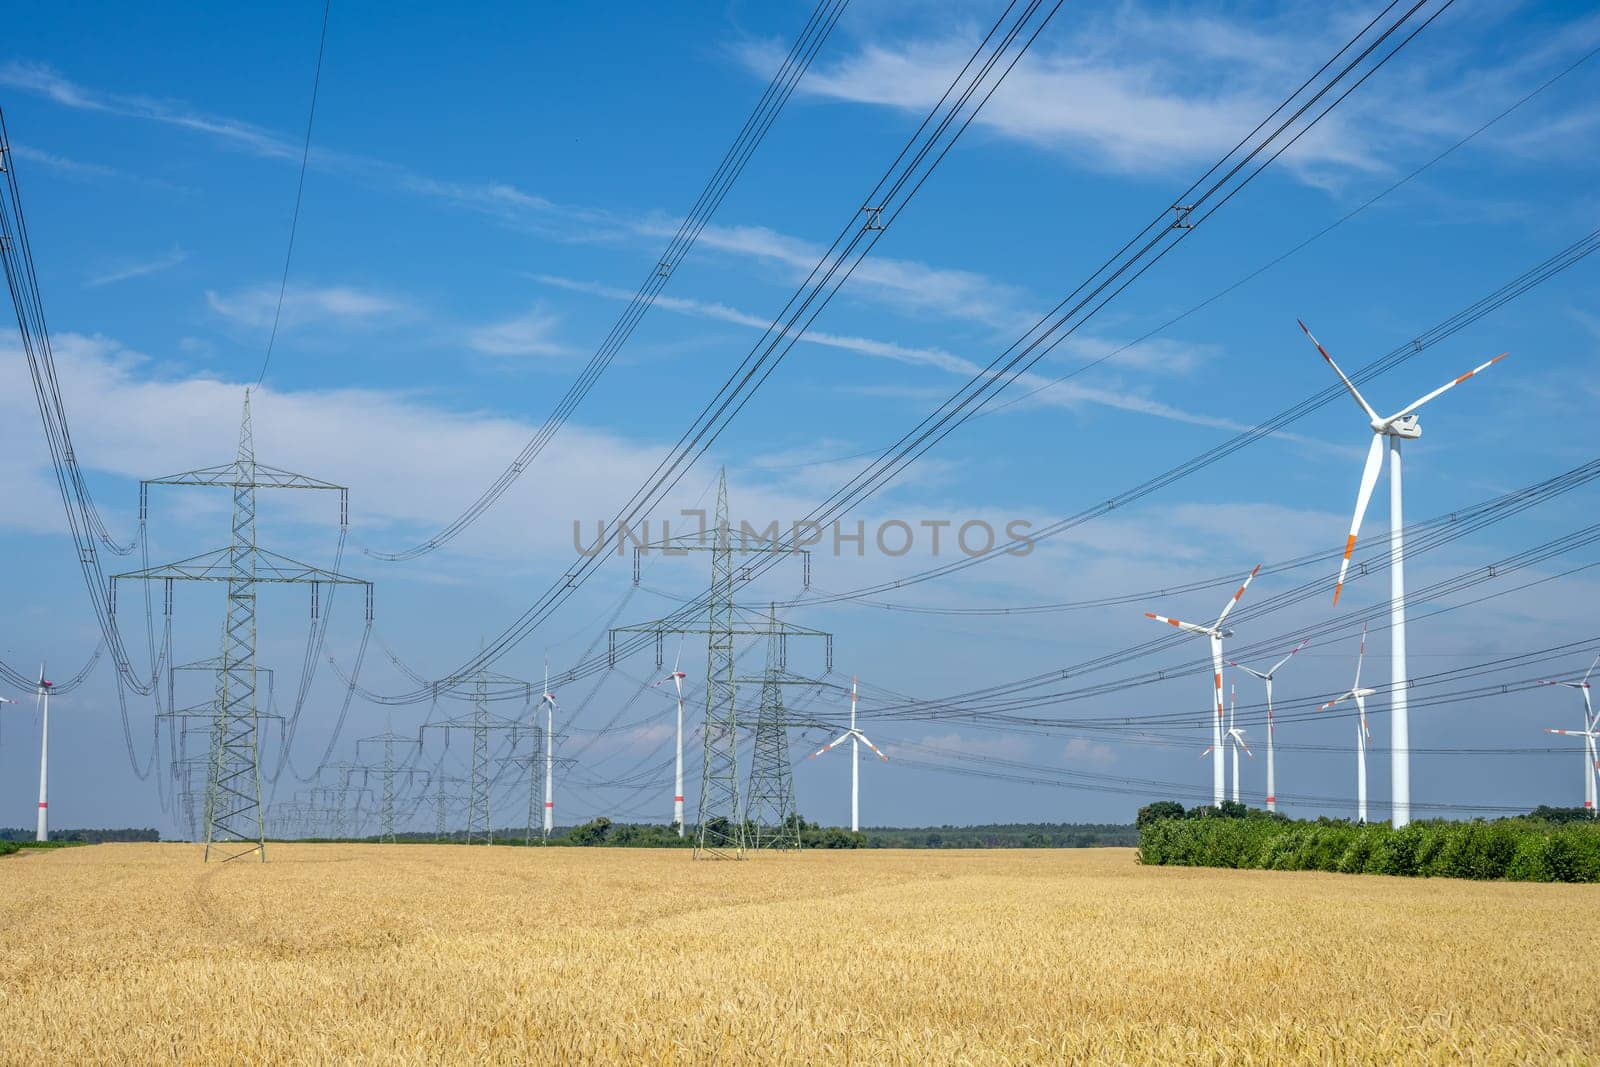 Pylons, power lines and wind turbines seen in an agricultural area in Germany